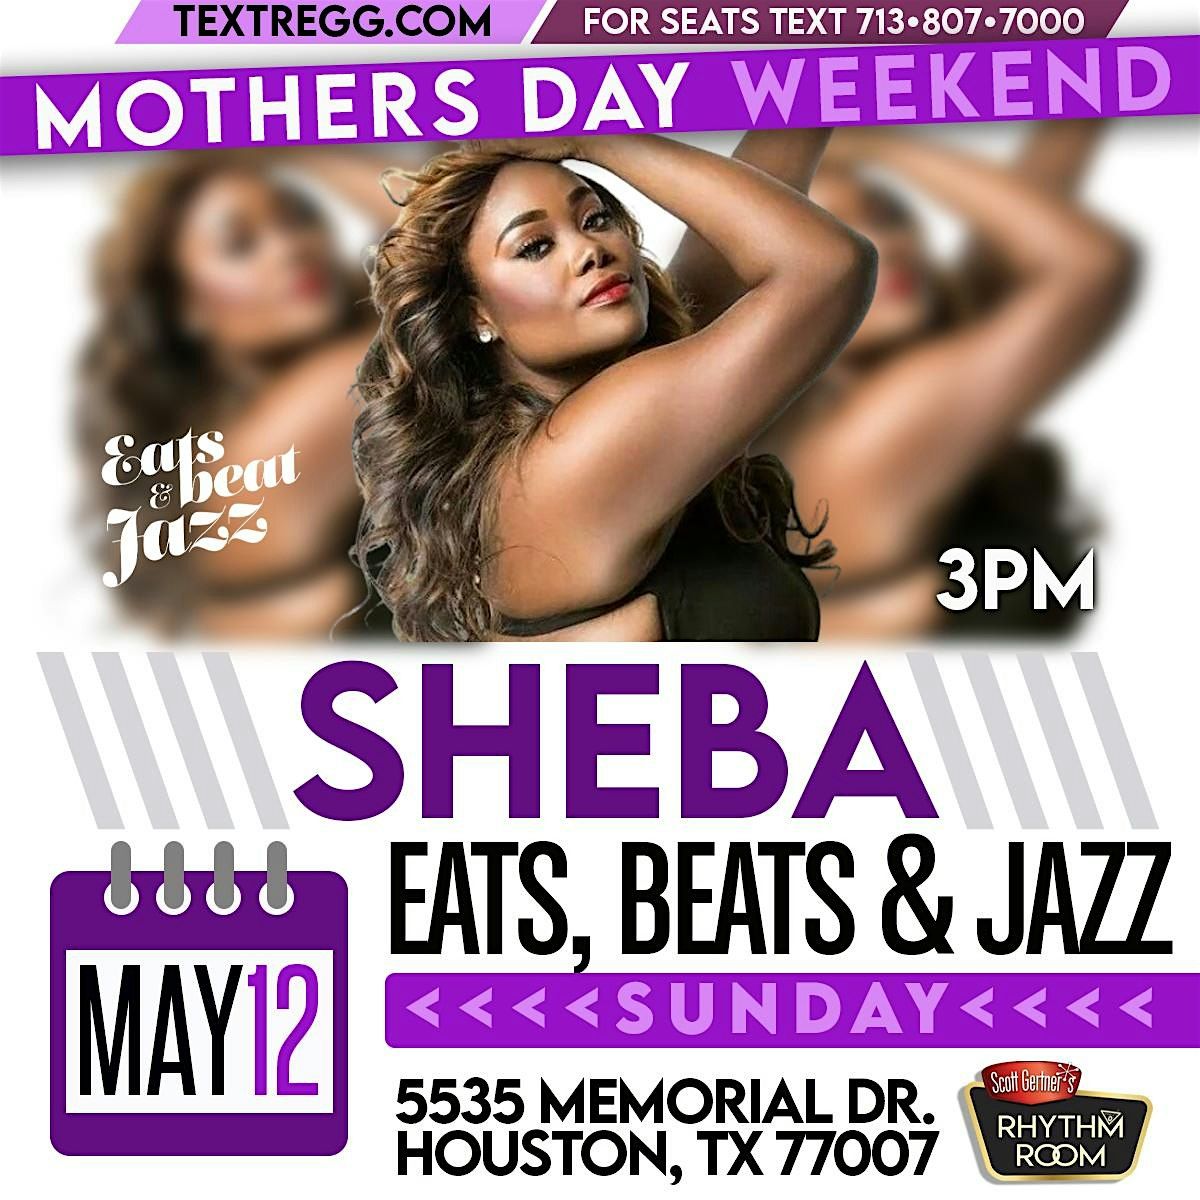 LIVE MUSIC MOTHERS DAY BRUNCH - EATS BEATS & JAZZ - THE SHEBA EXPERIENCE